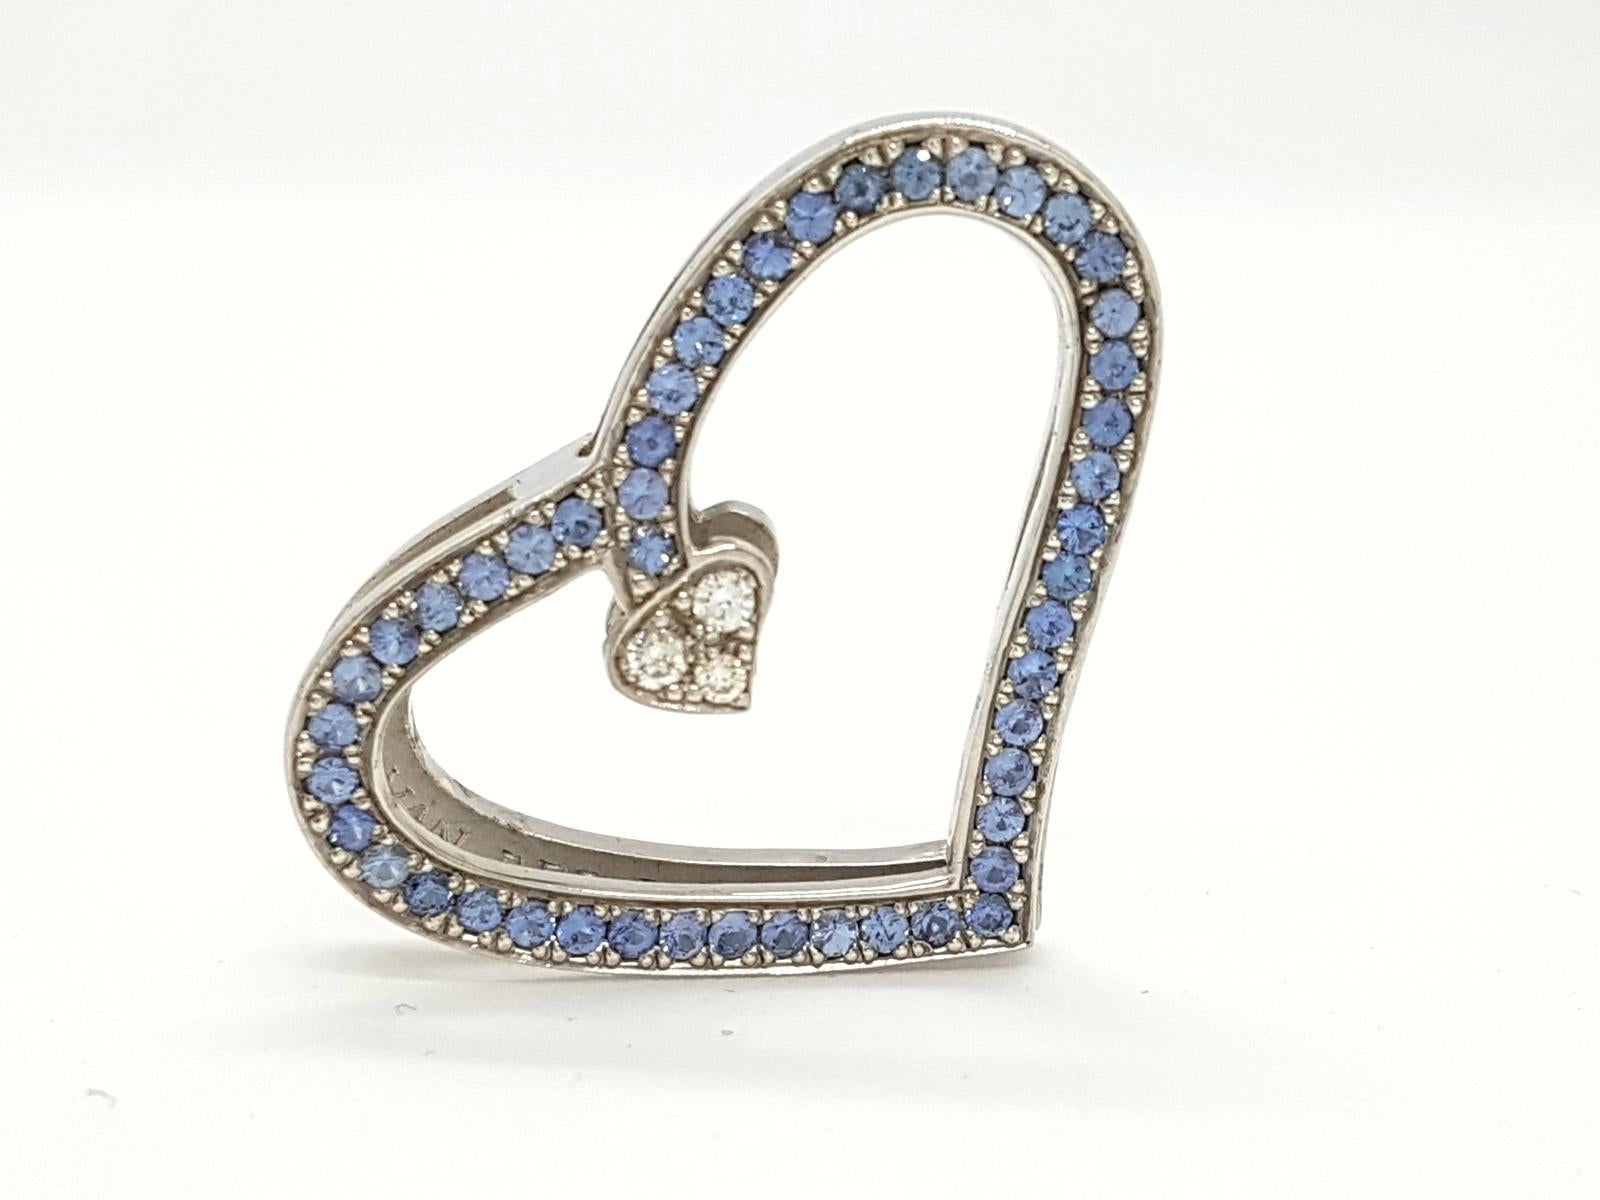 Heart pendant House VAN DER BAUWEDE
- In 925 th
- Set with 3 brilliant cut diamonds G-VSpour a total of about 0.030 and 48 light blue sapphire round pruned to about 0.24 ct total
New condition. size 2.1 cm x 3 cm.
- Weight: 5.60 gr
- Controlled.